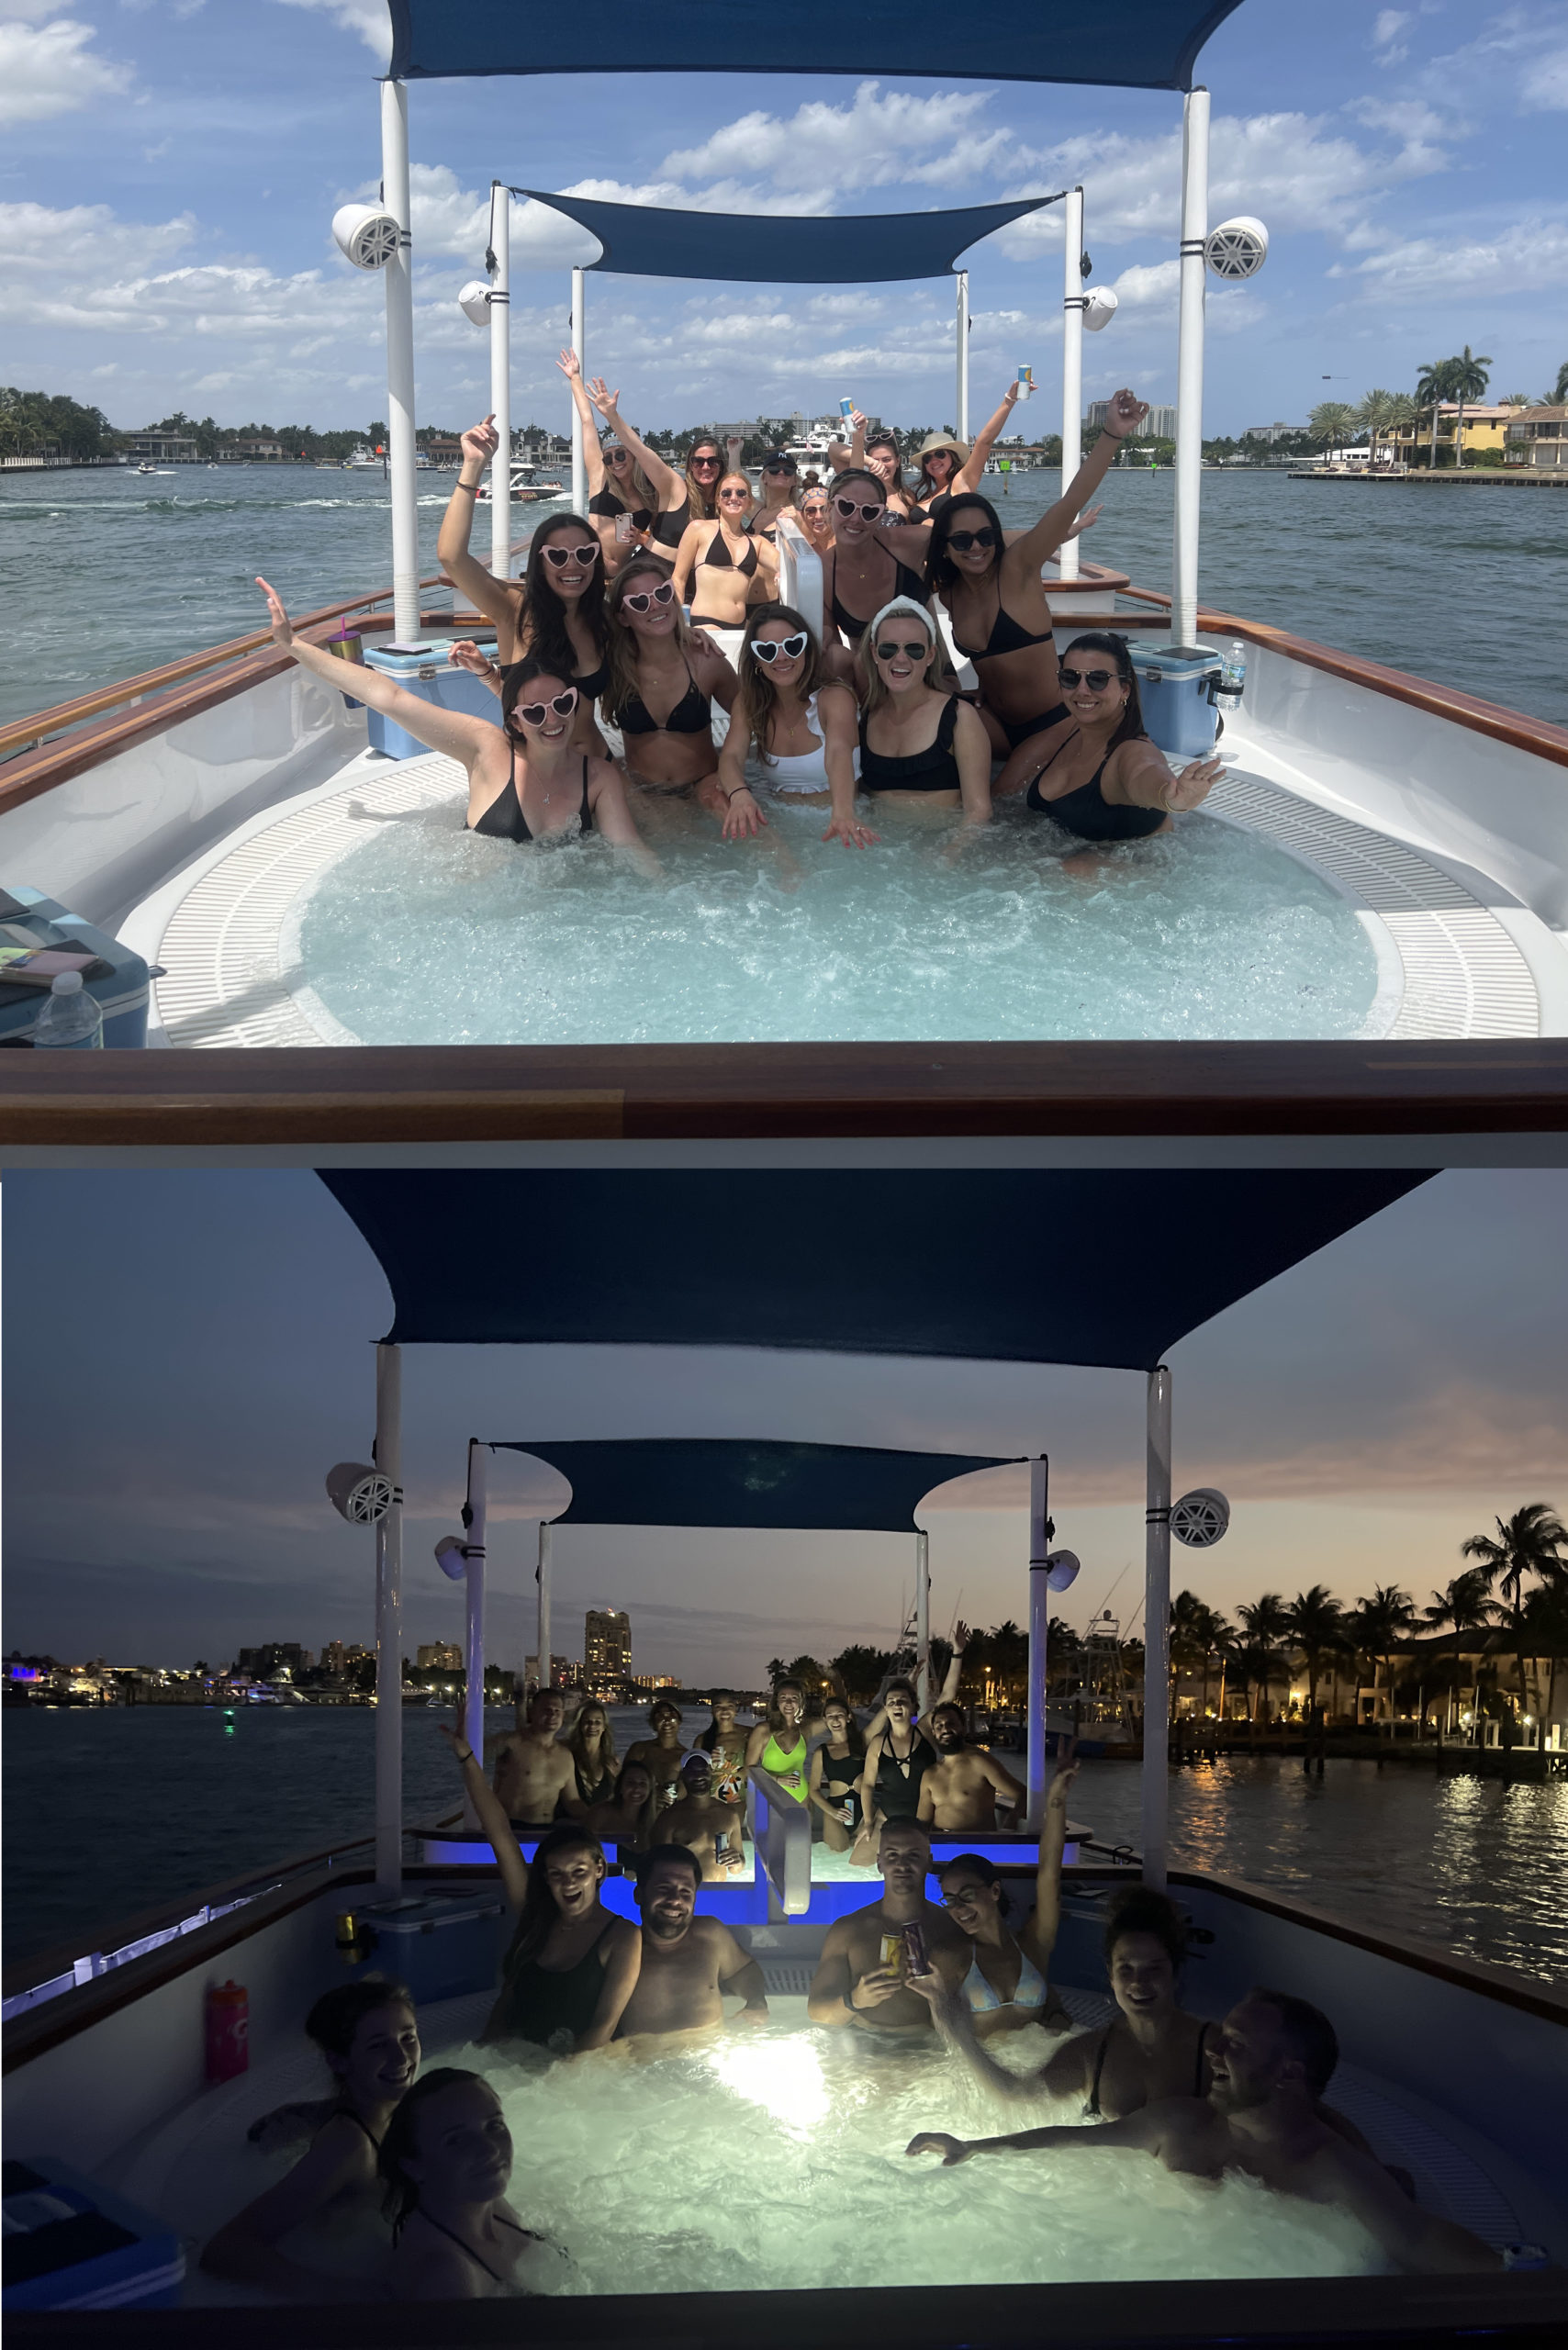 Party on hot tub boat day and night in fort lauderdale 